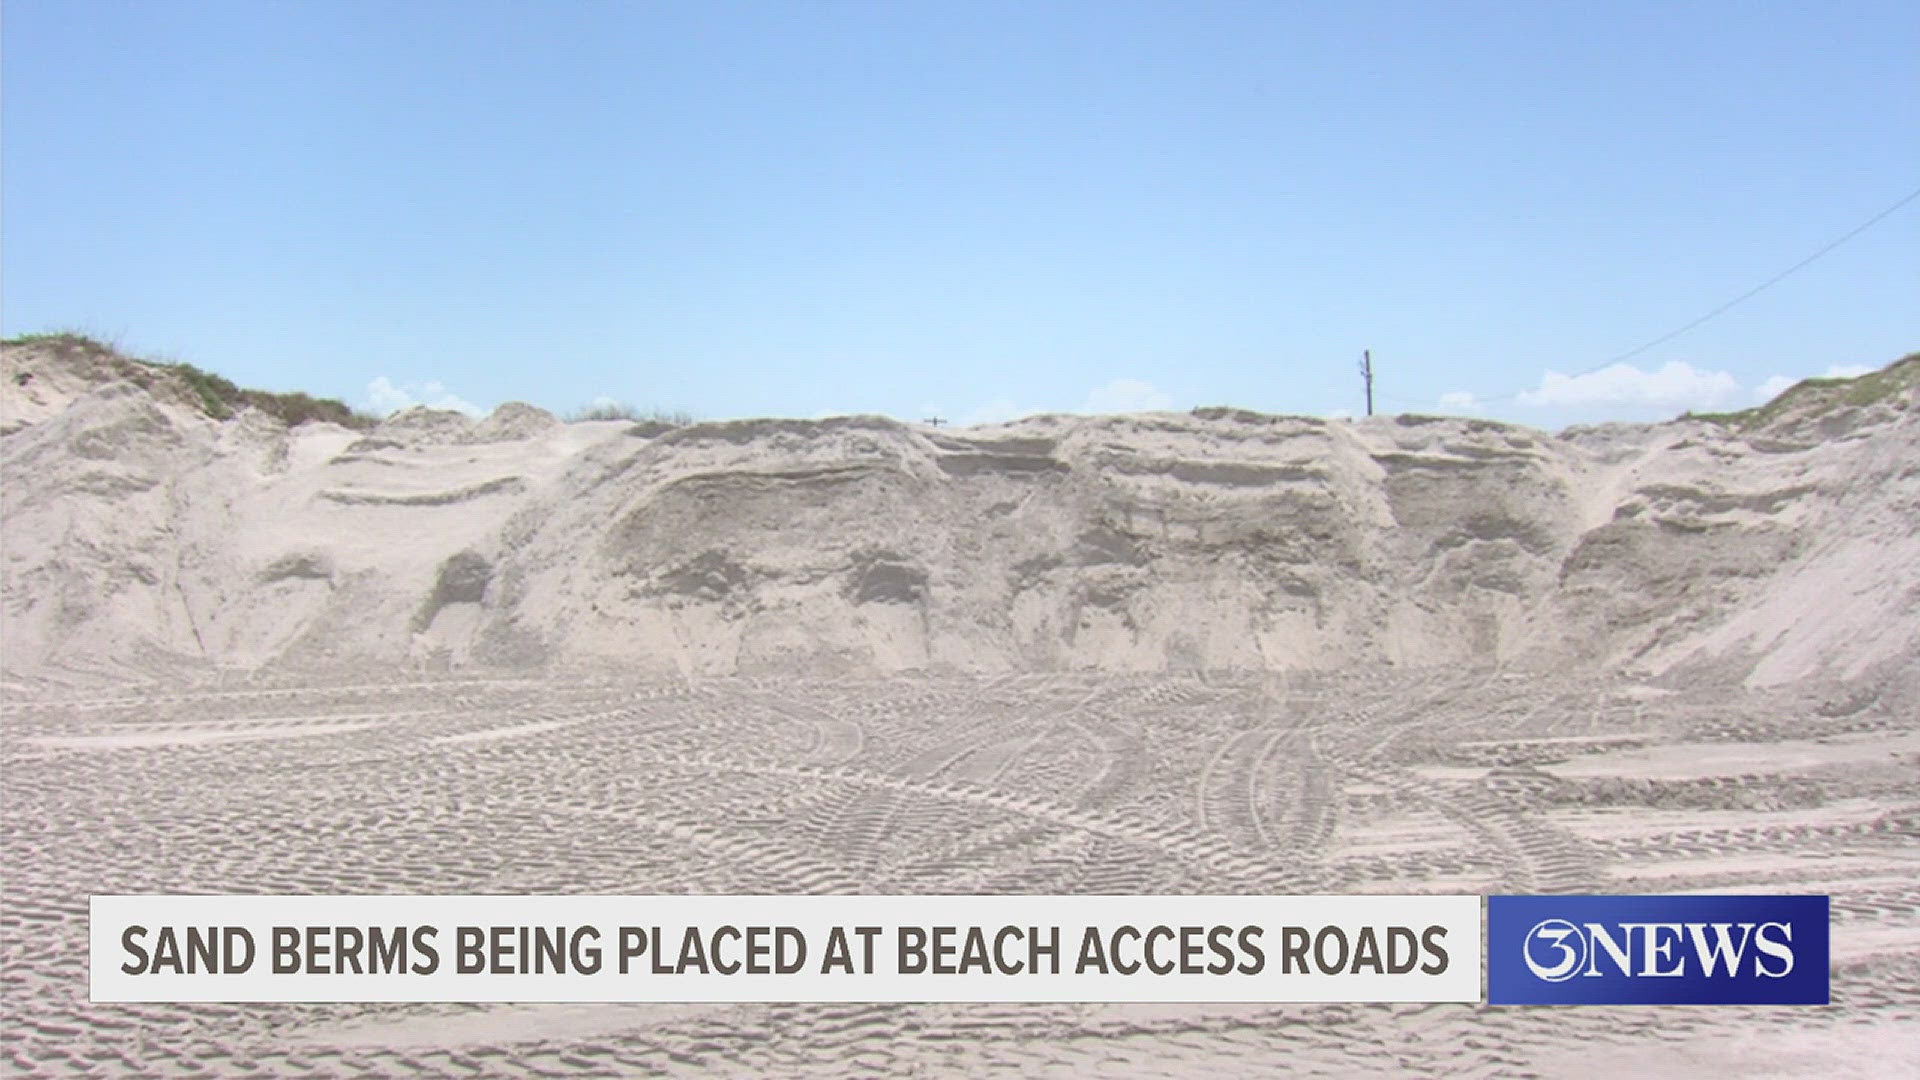 Sand berms are being placed at beach access roads.